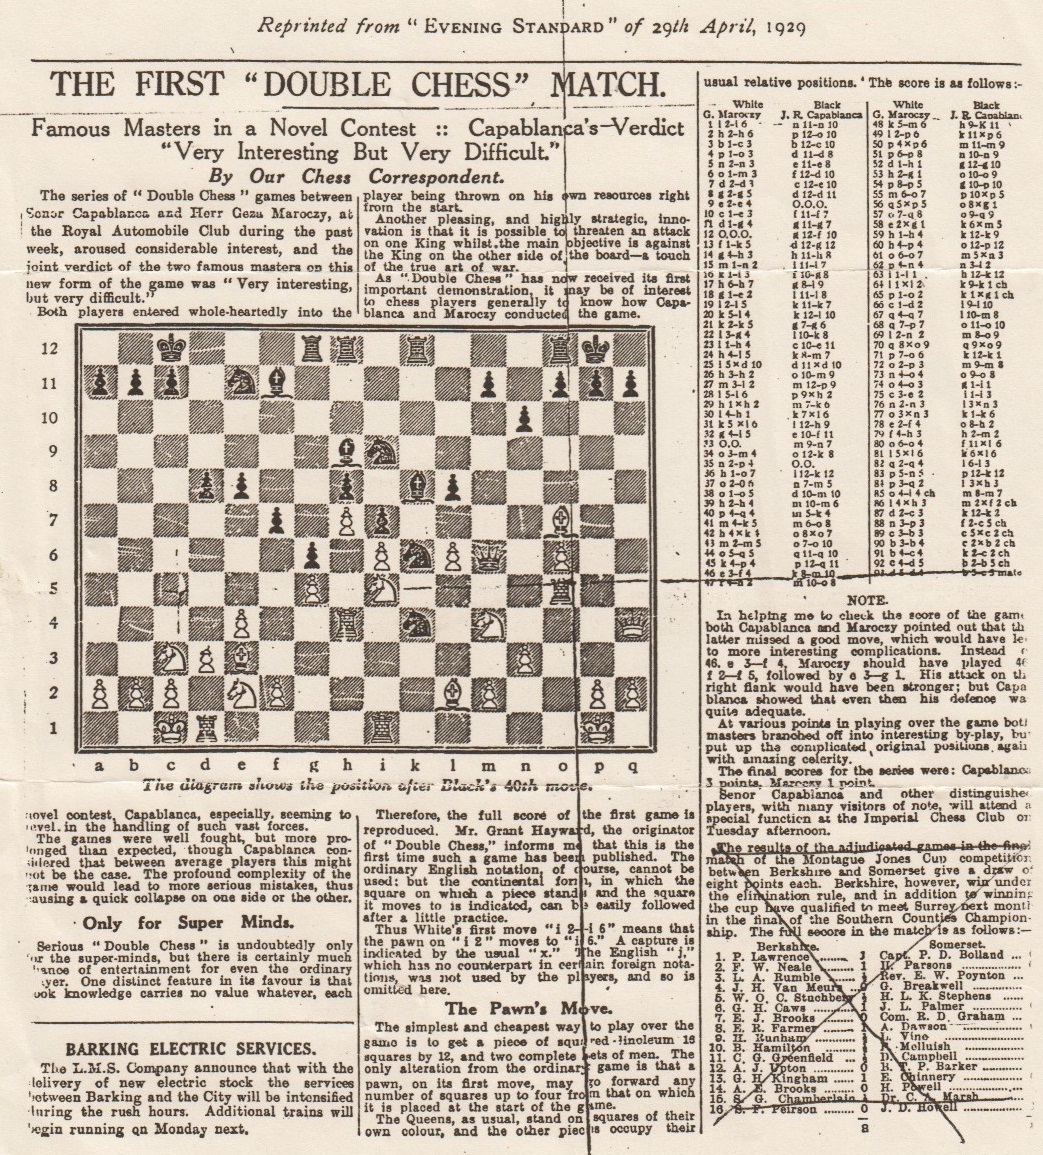 Chess Notes by Edward Winter